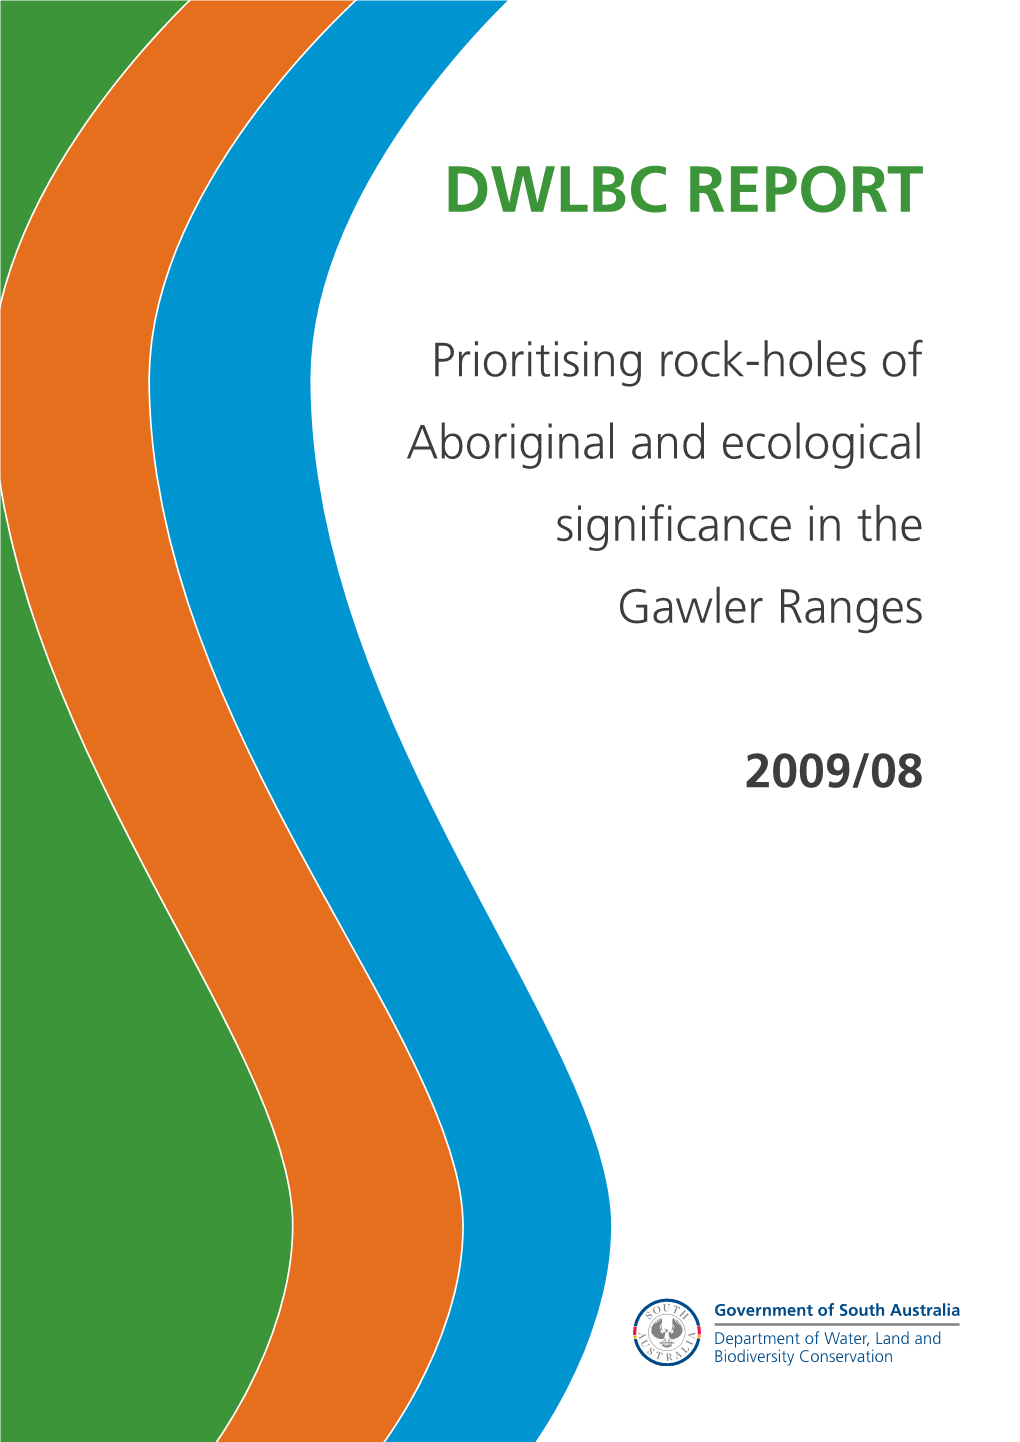 Prioritising Rock-Holes of Aboriginal and Ecological Significance in the Gawler Ranges